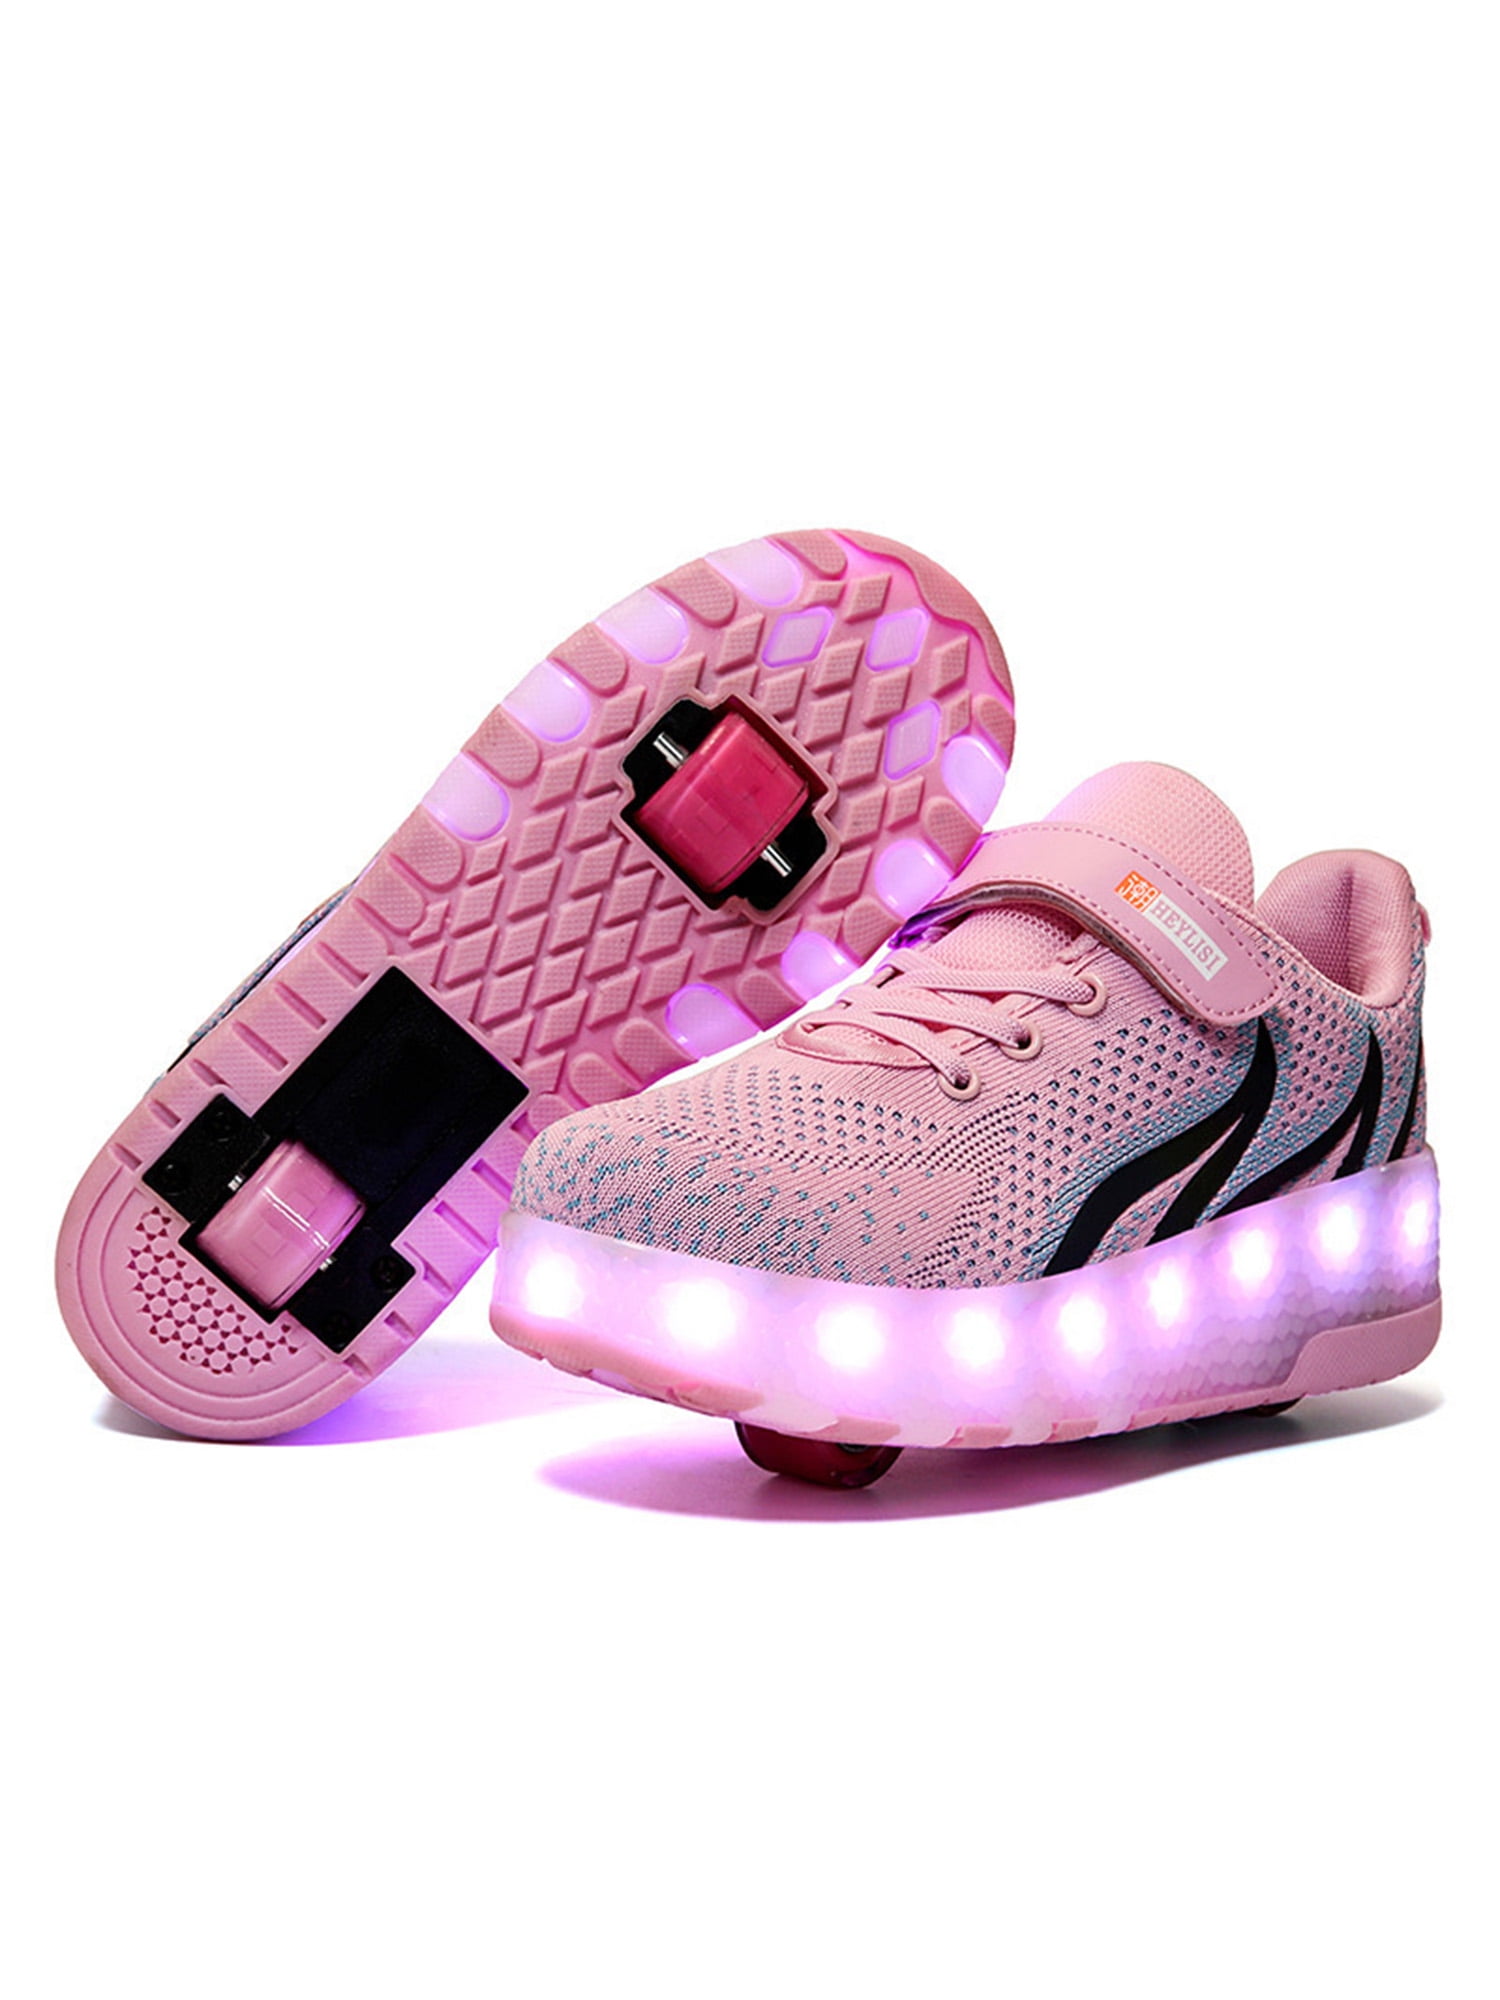 Believed Girl Boy Light Up Wheels Roller Shoes Skates Sneakers for Kid Youth Christmas 